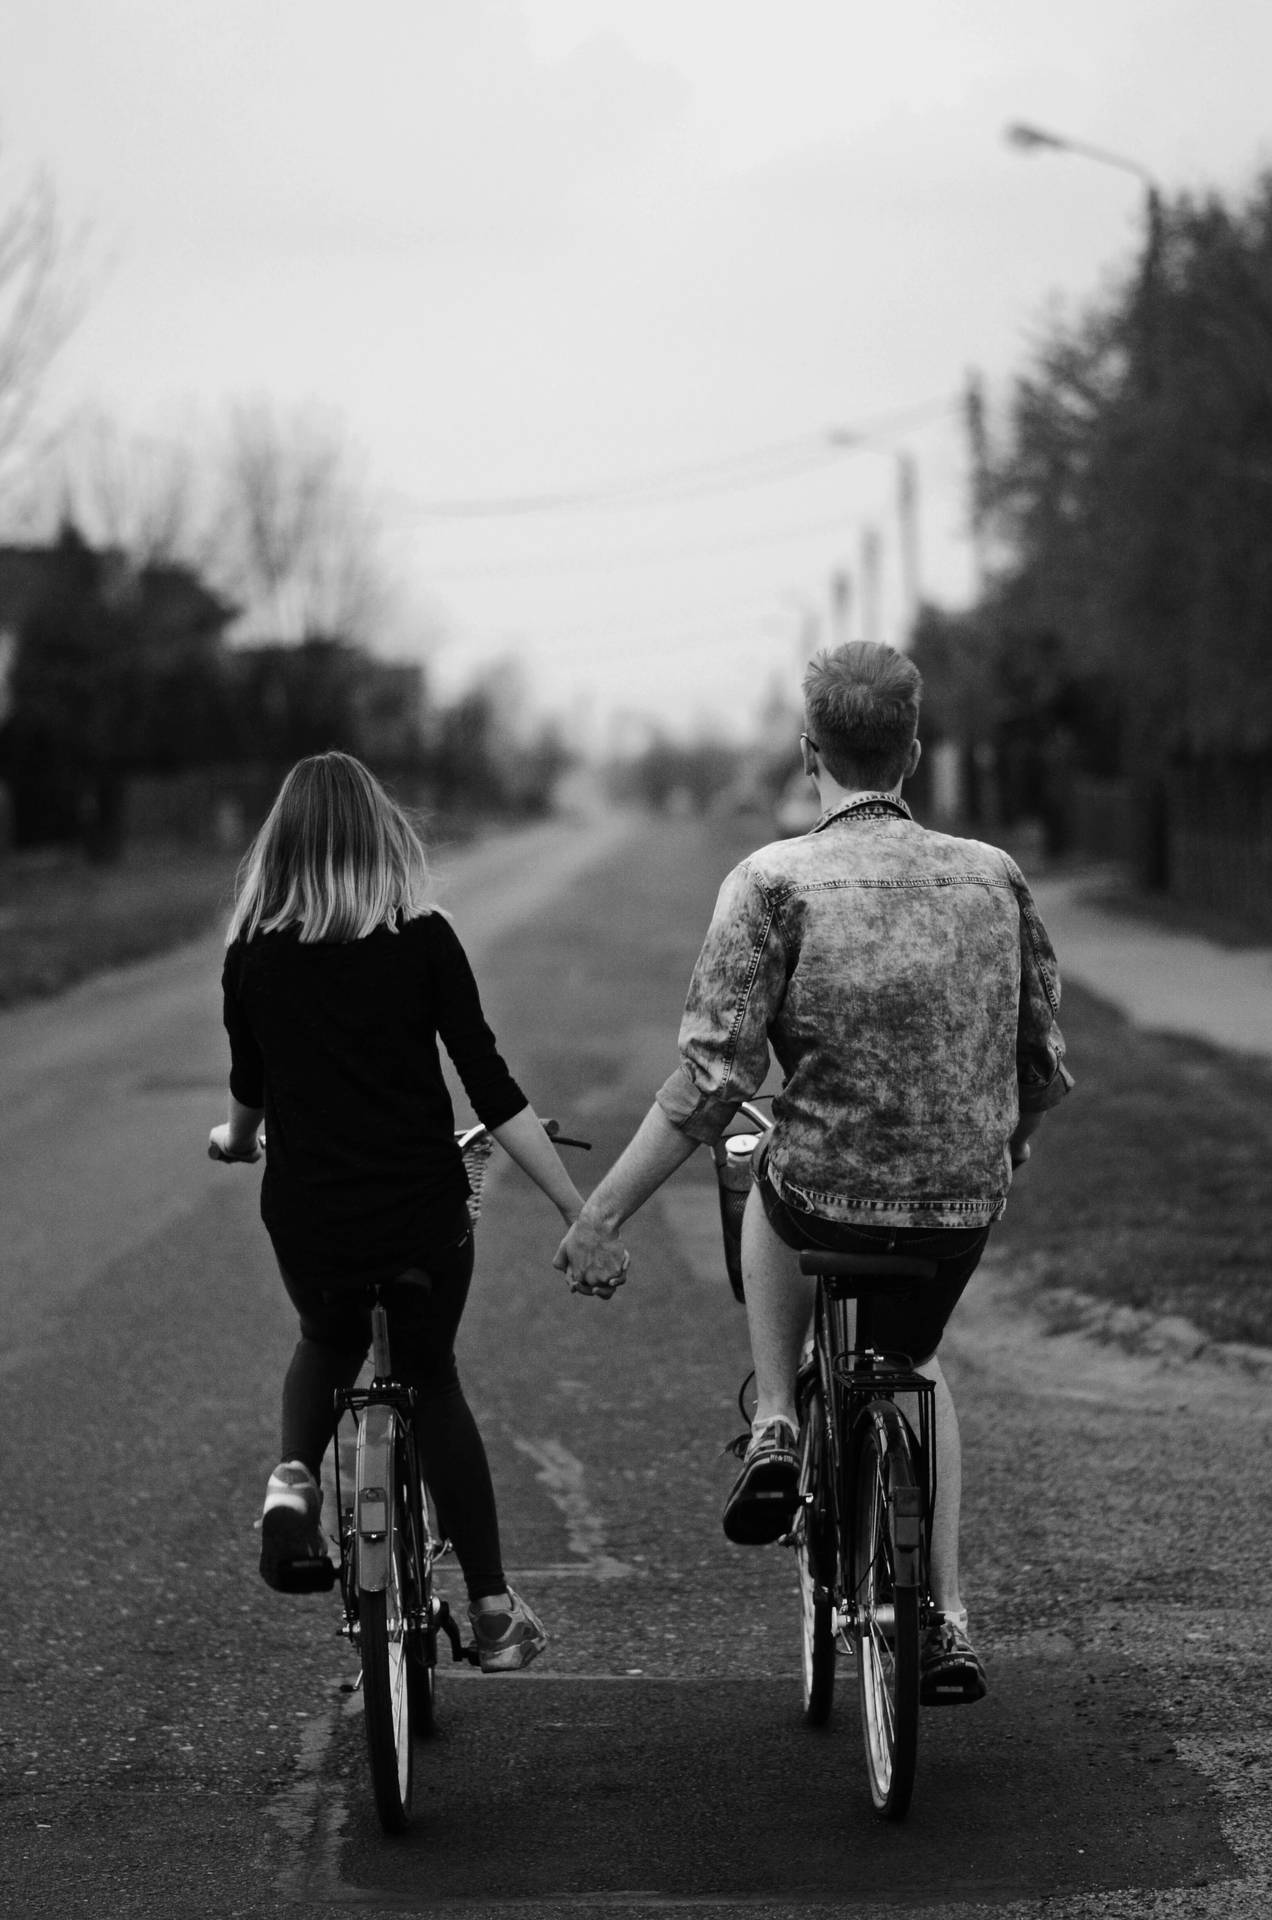 Black And White Holding Hands While Riding Bikes